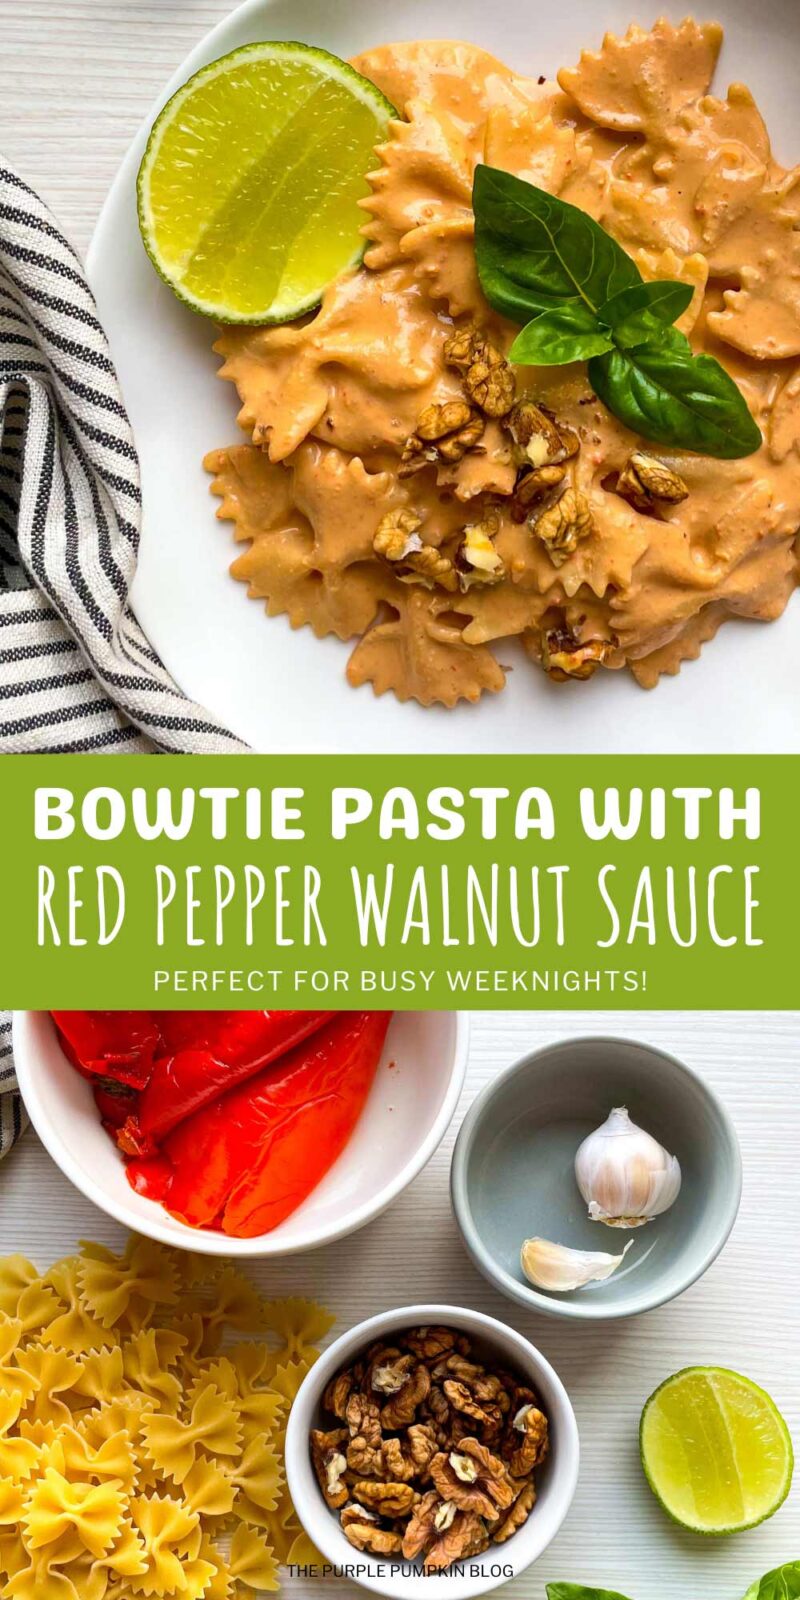 Bowtie Pasta with Red Pepper Walnut Sauce